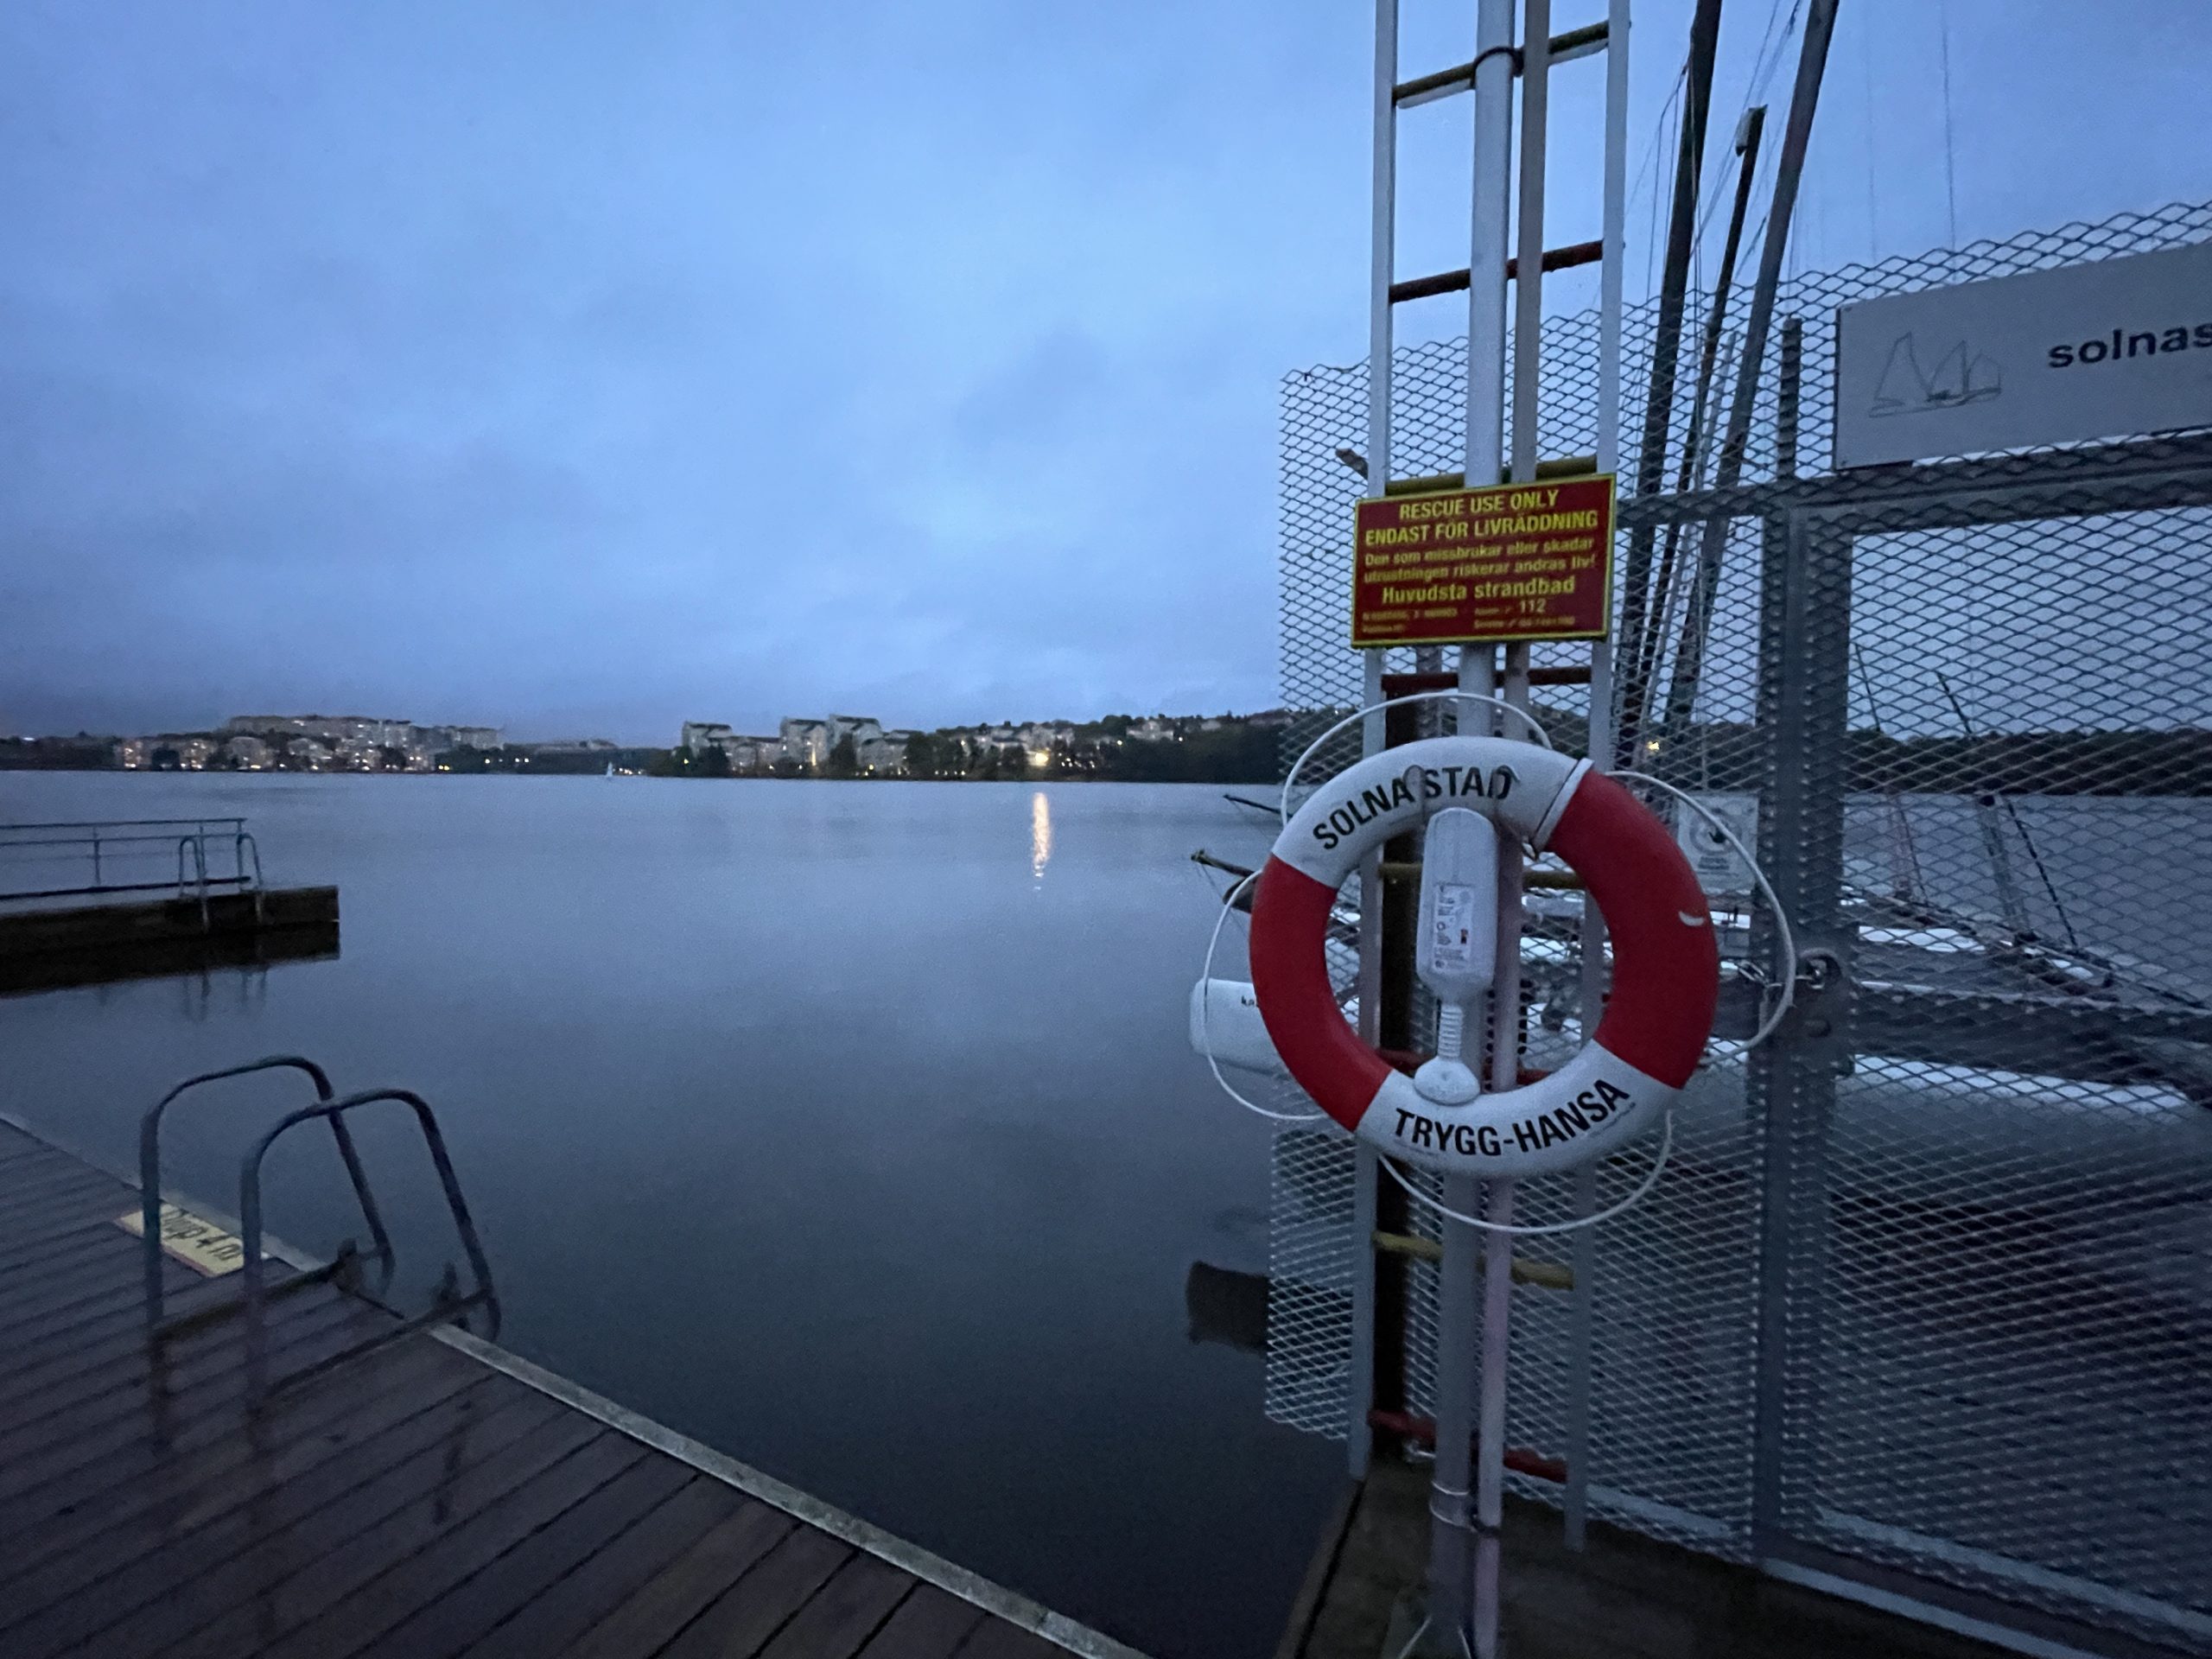 view of lake from the dock with dock in the bottom of the frame and life preserver mounted on metal rack in foreground. Solana, Stockholm Sweden.